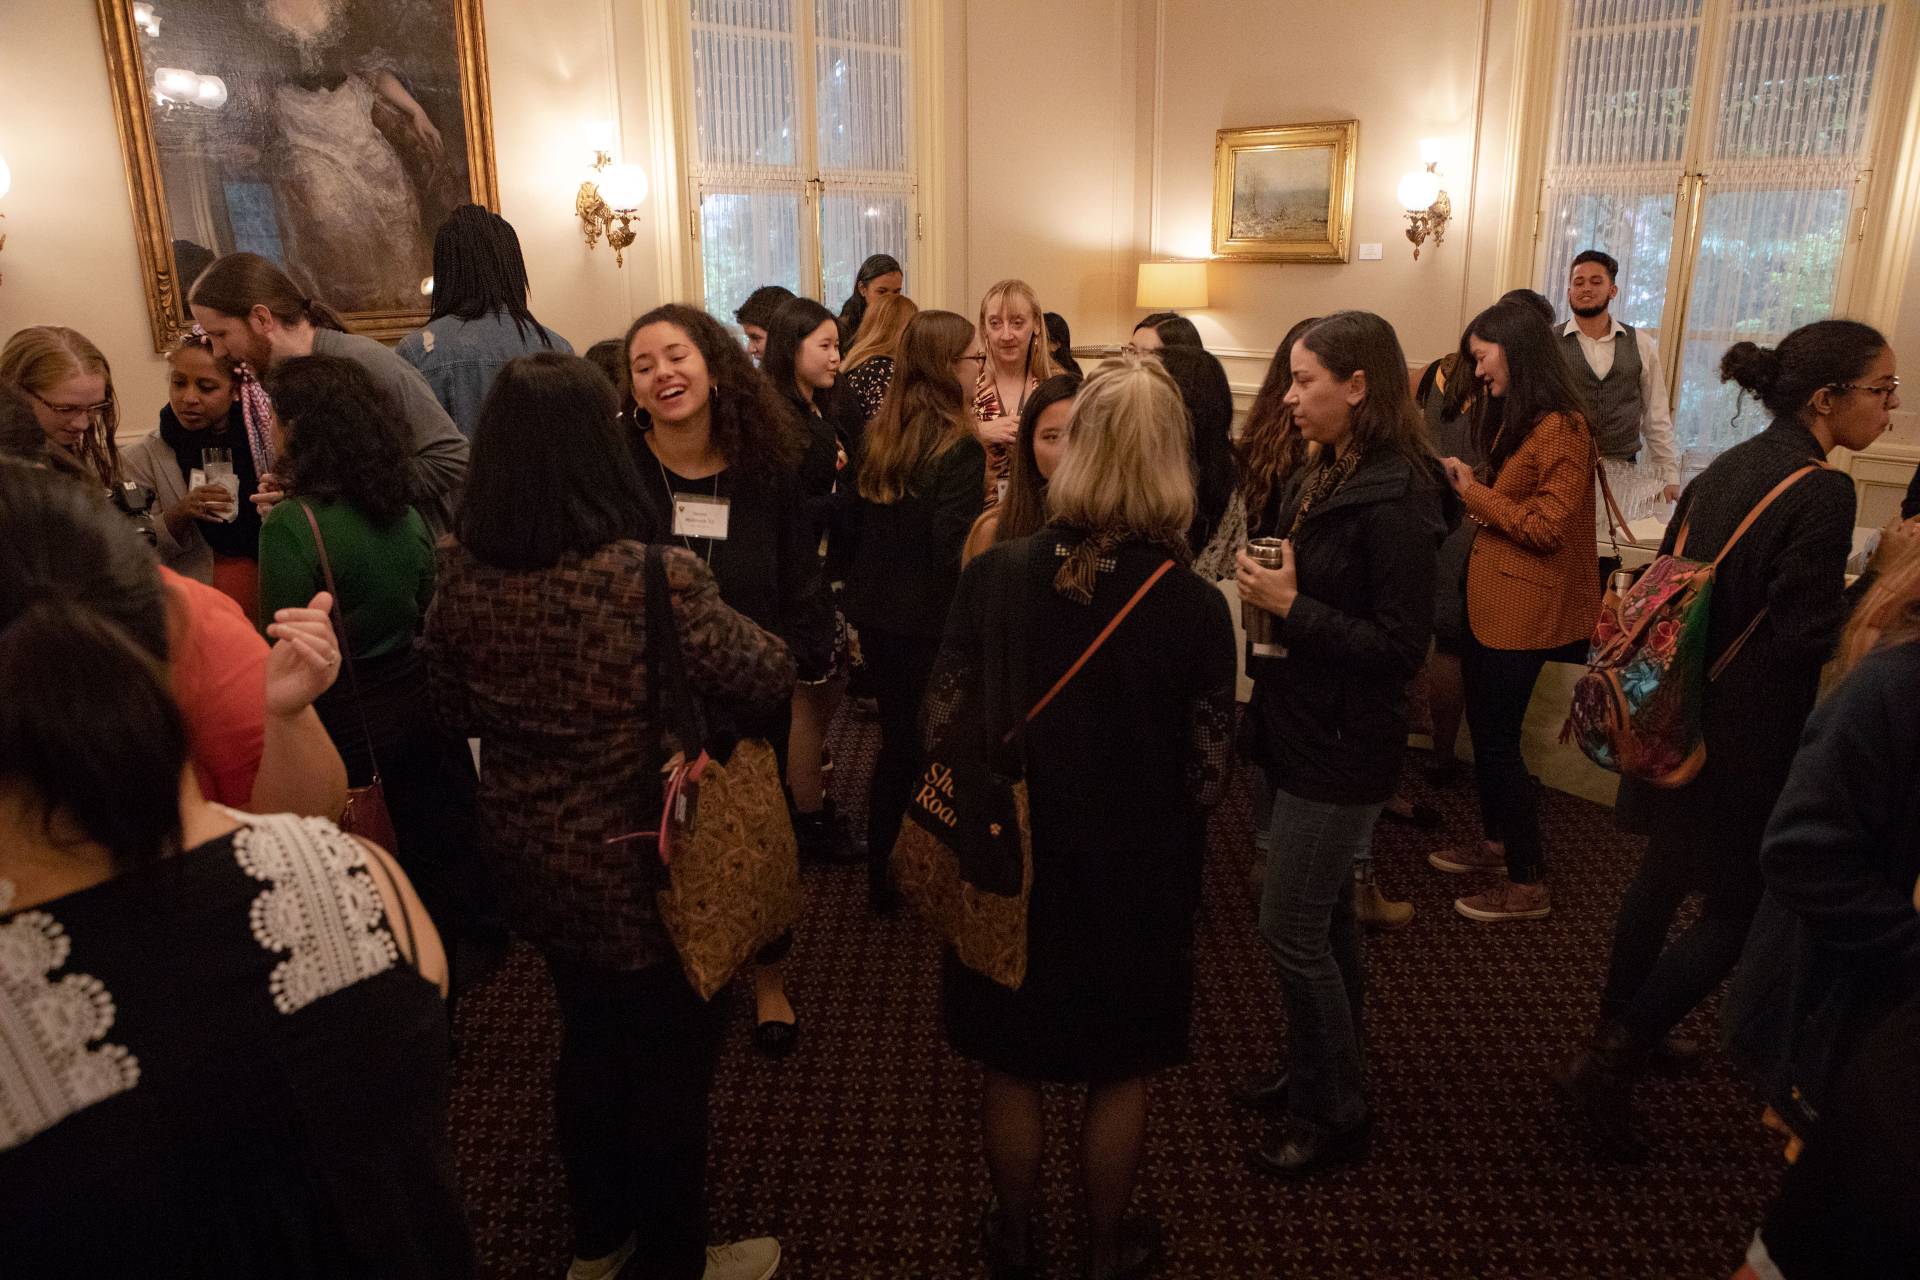 She Roars attendees at reception in Prospect House